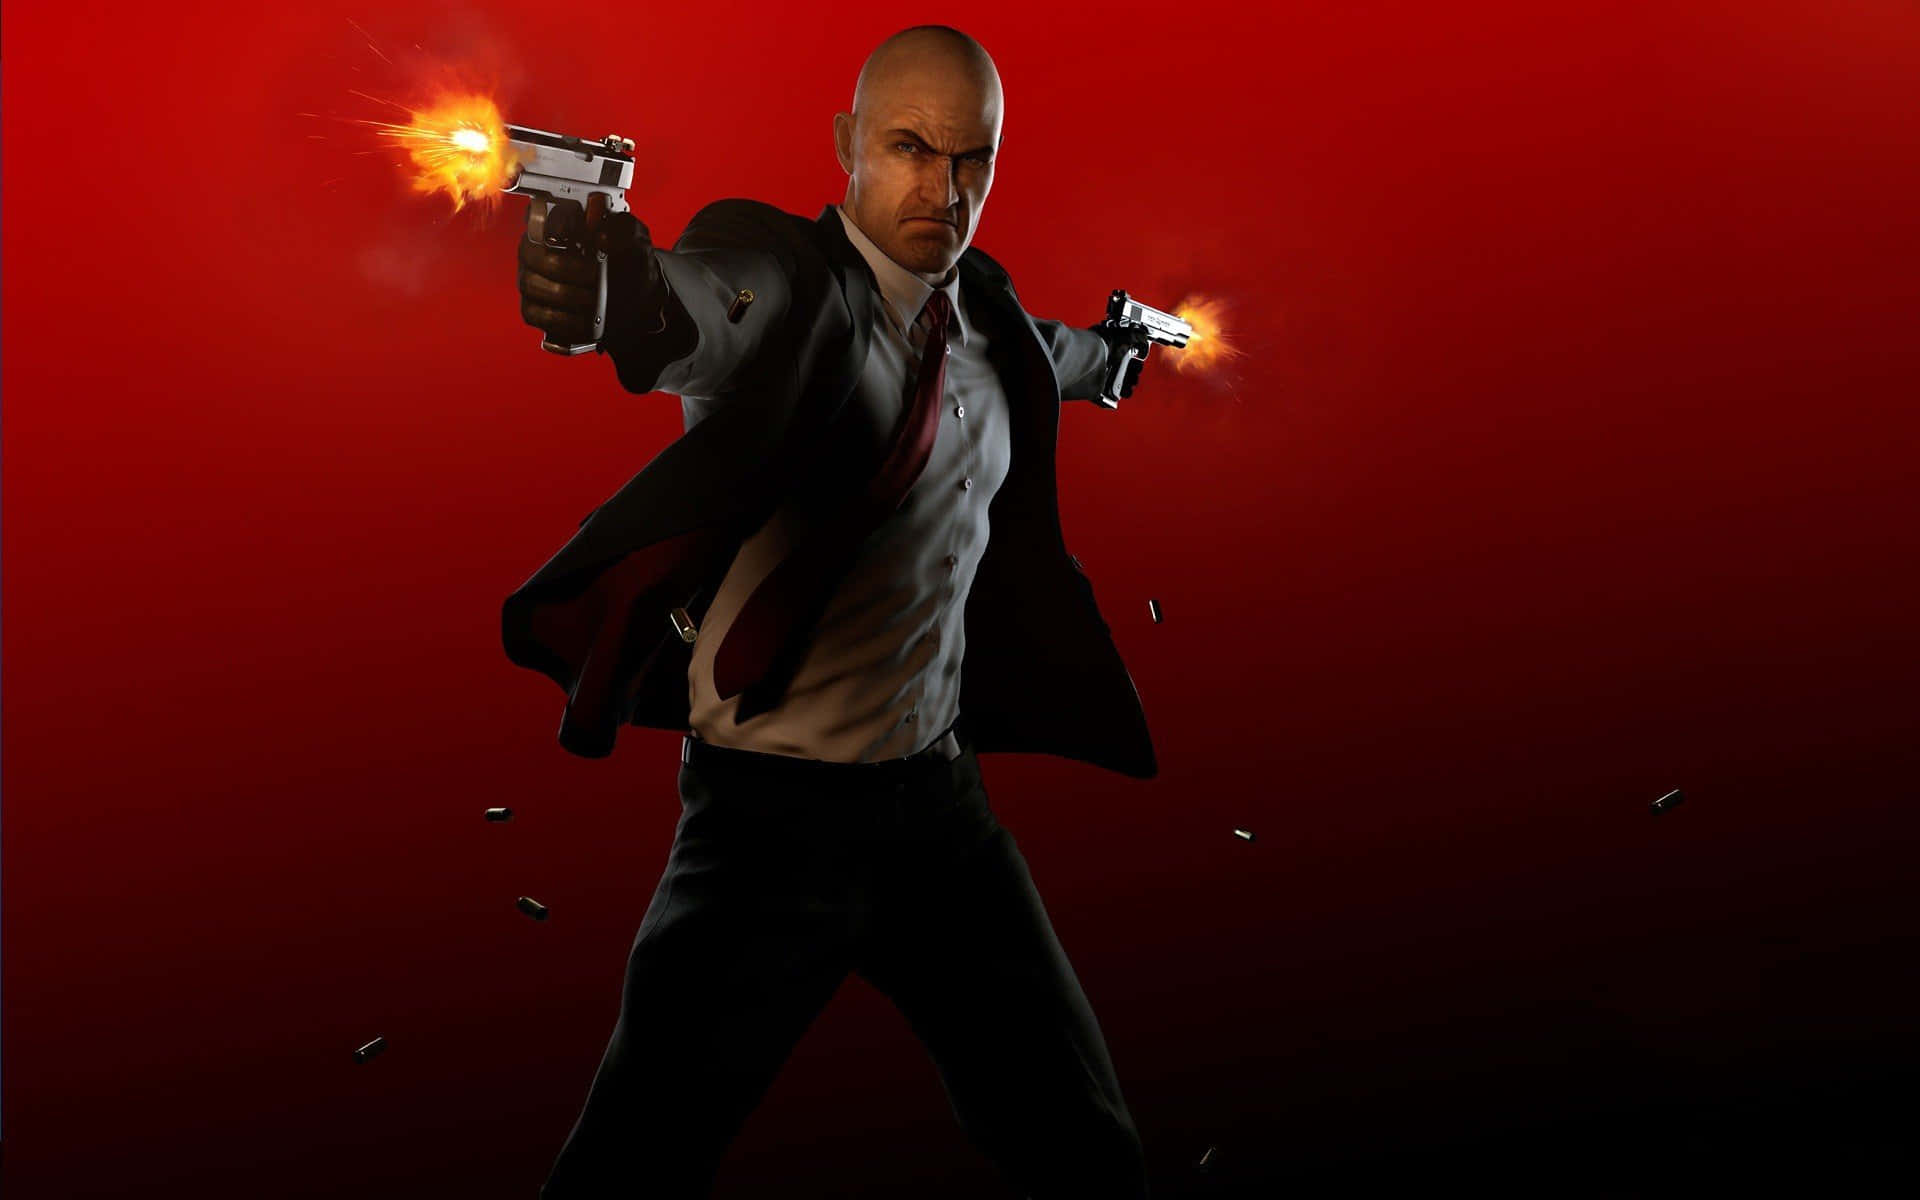 Agent 47 in 1080p Hitman Absolution.